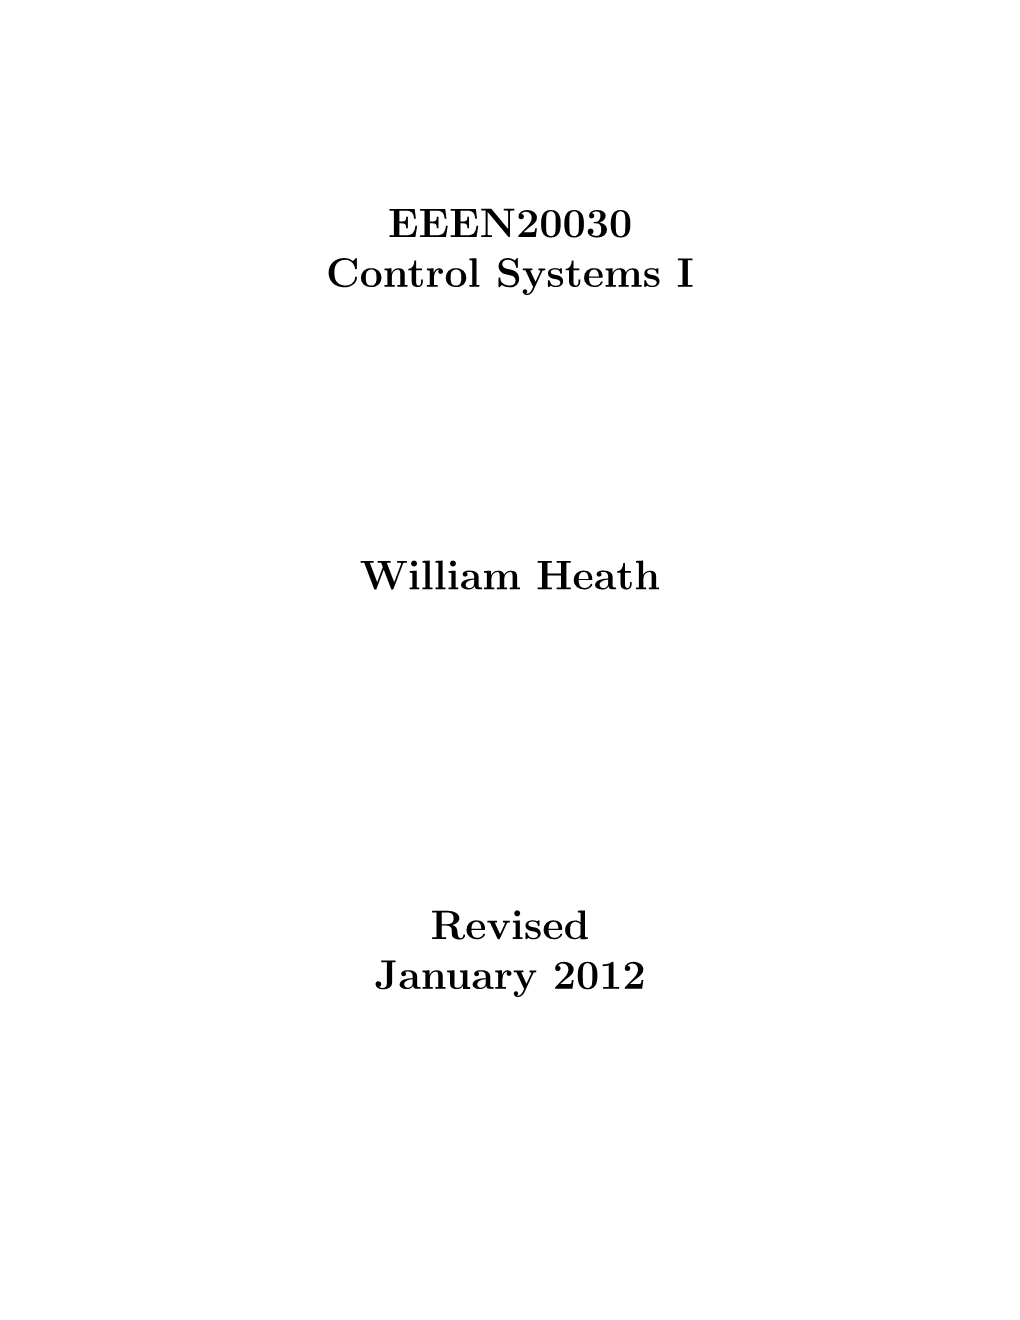 EEEN20030 Control Systems I William Heath Revised January 2012